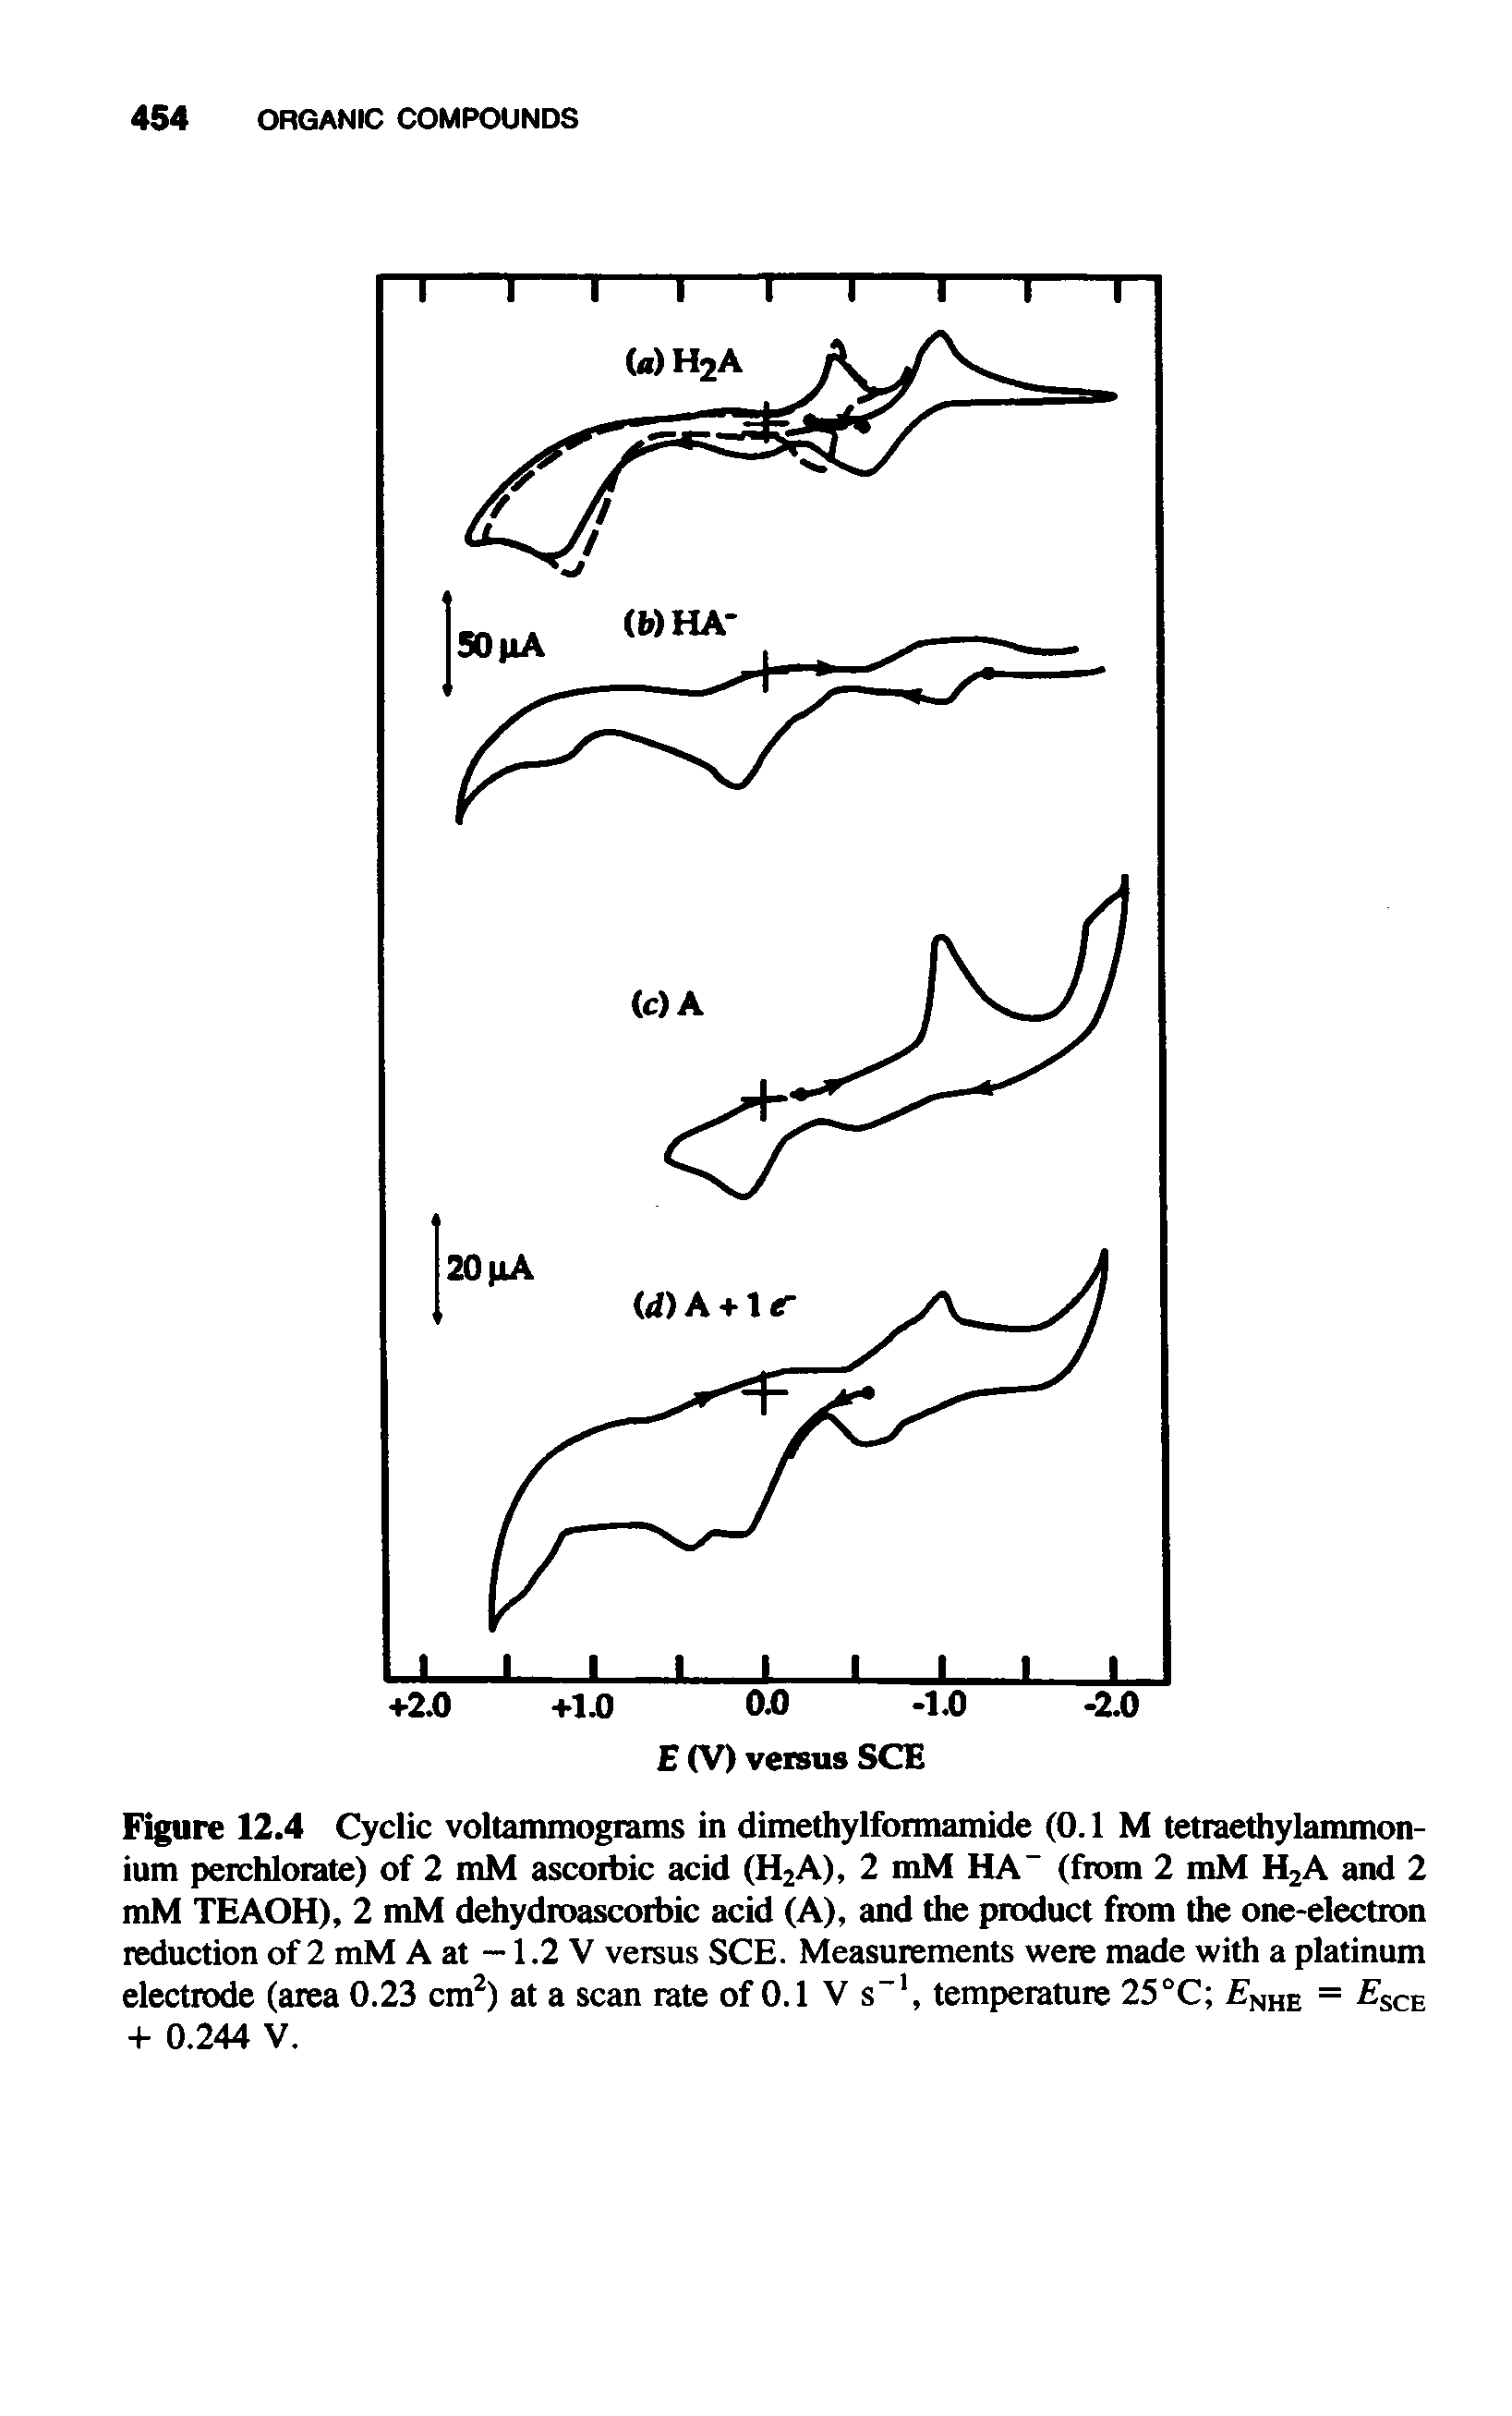 Figure 12.4 Cyclic voltammograms in dimethylformamide (0.1 M tetraethylammon-ium perchlorate) of 2 mM ascorbic acid (H2A), 2 mM HA- (from 2 mM H2A and 2 mM TEAOH), 2 mM dehydroascoibic acid (A), and the product from the one-electron reduction of 2 mM A at —1.2V versus SCE. Measurements were made with a platinum electrode (area 0.23 cm2) at a scan rate of 0.1 V s-1, temperature 25°C NHe = sce + 0.244 V.